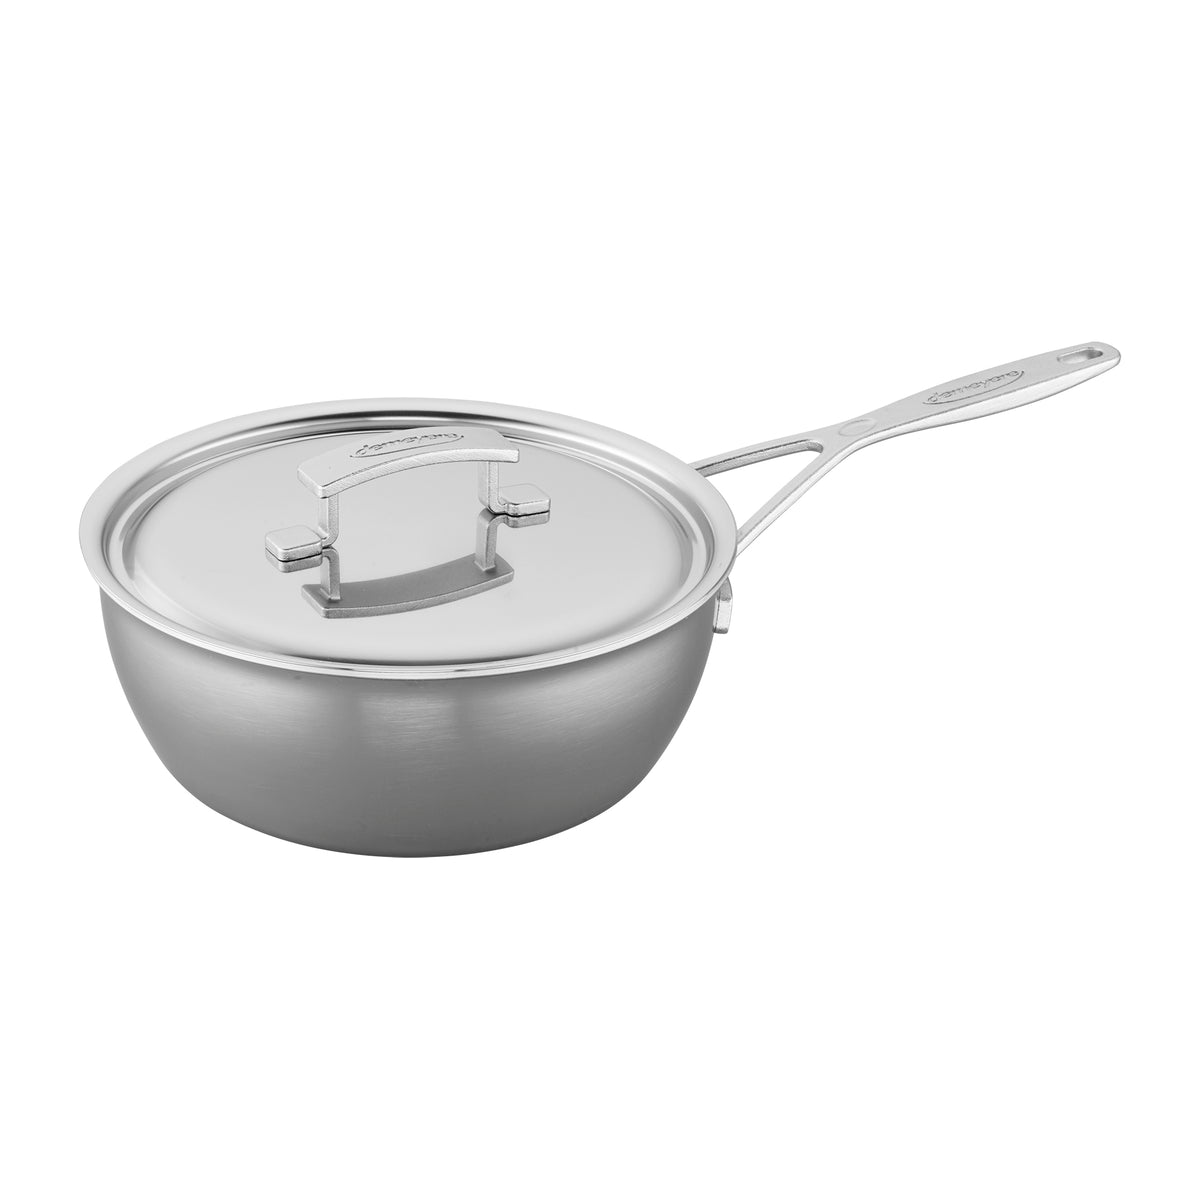 Demeyere Industry 5-Ply 3.5 Qt Stainless Steel Essential Pan